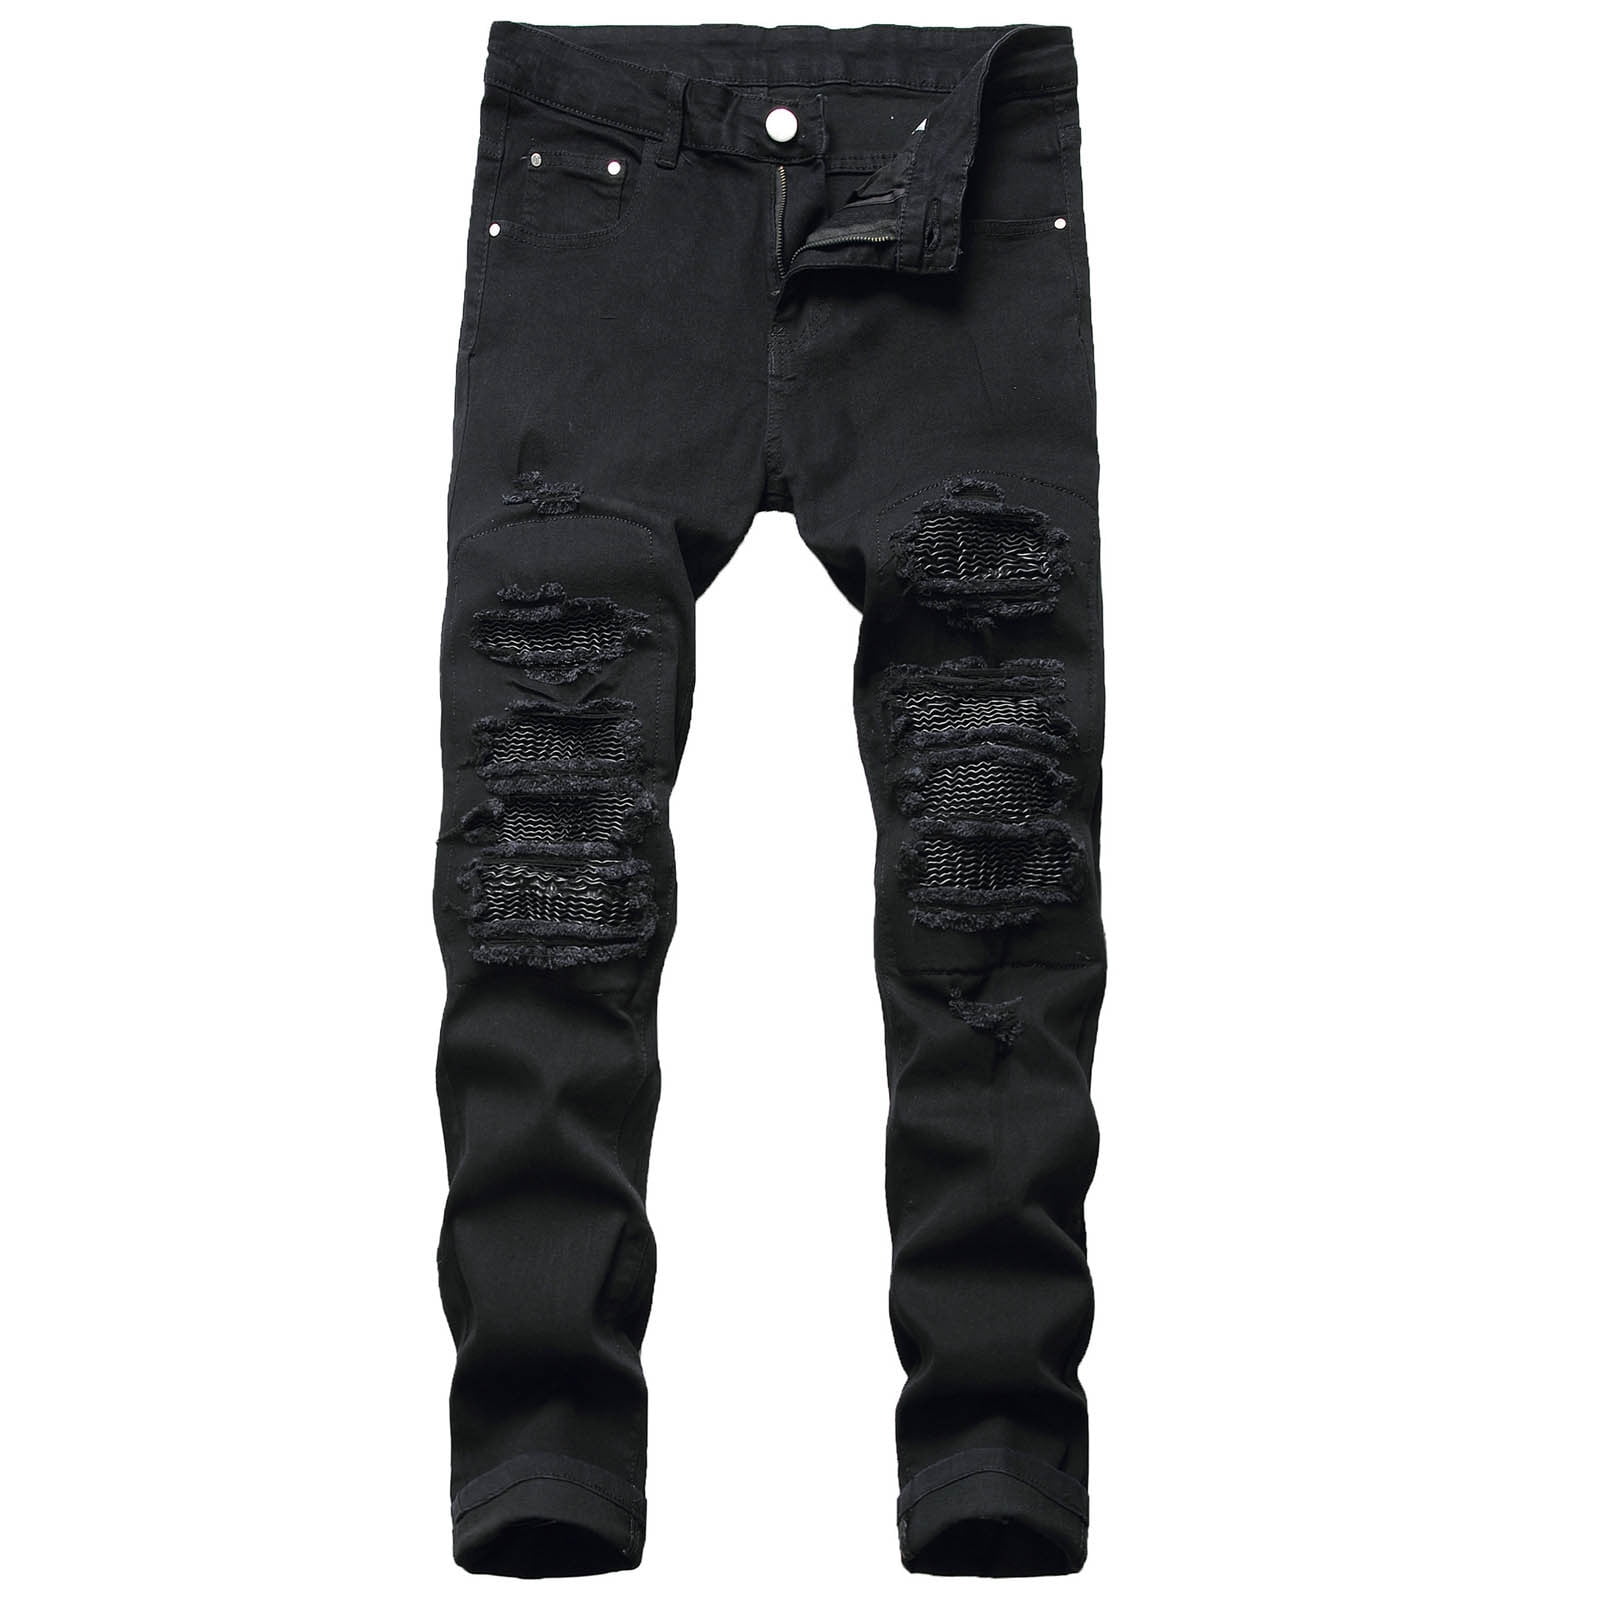 Clearance Gallickan Mens Ripped Jeans Blue Black Ripped Distressed Jeans  for Men Slim Fit, Mens Fashion Design Streetwear Destroyed Jeans Pants